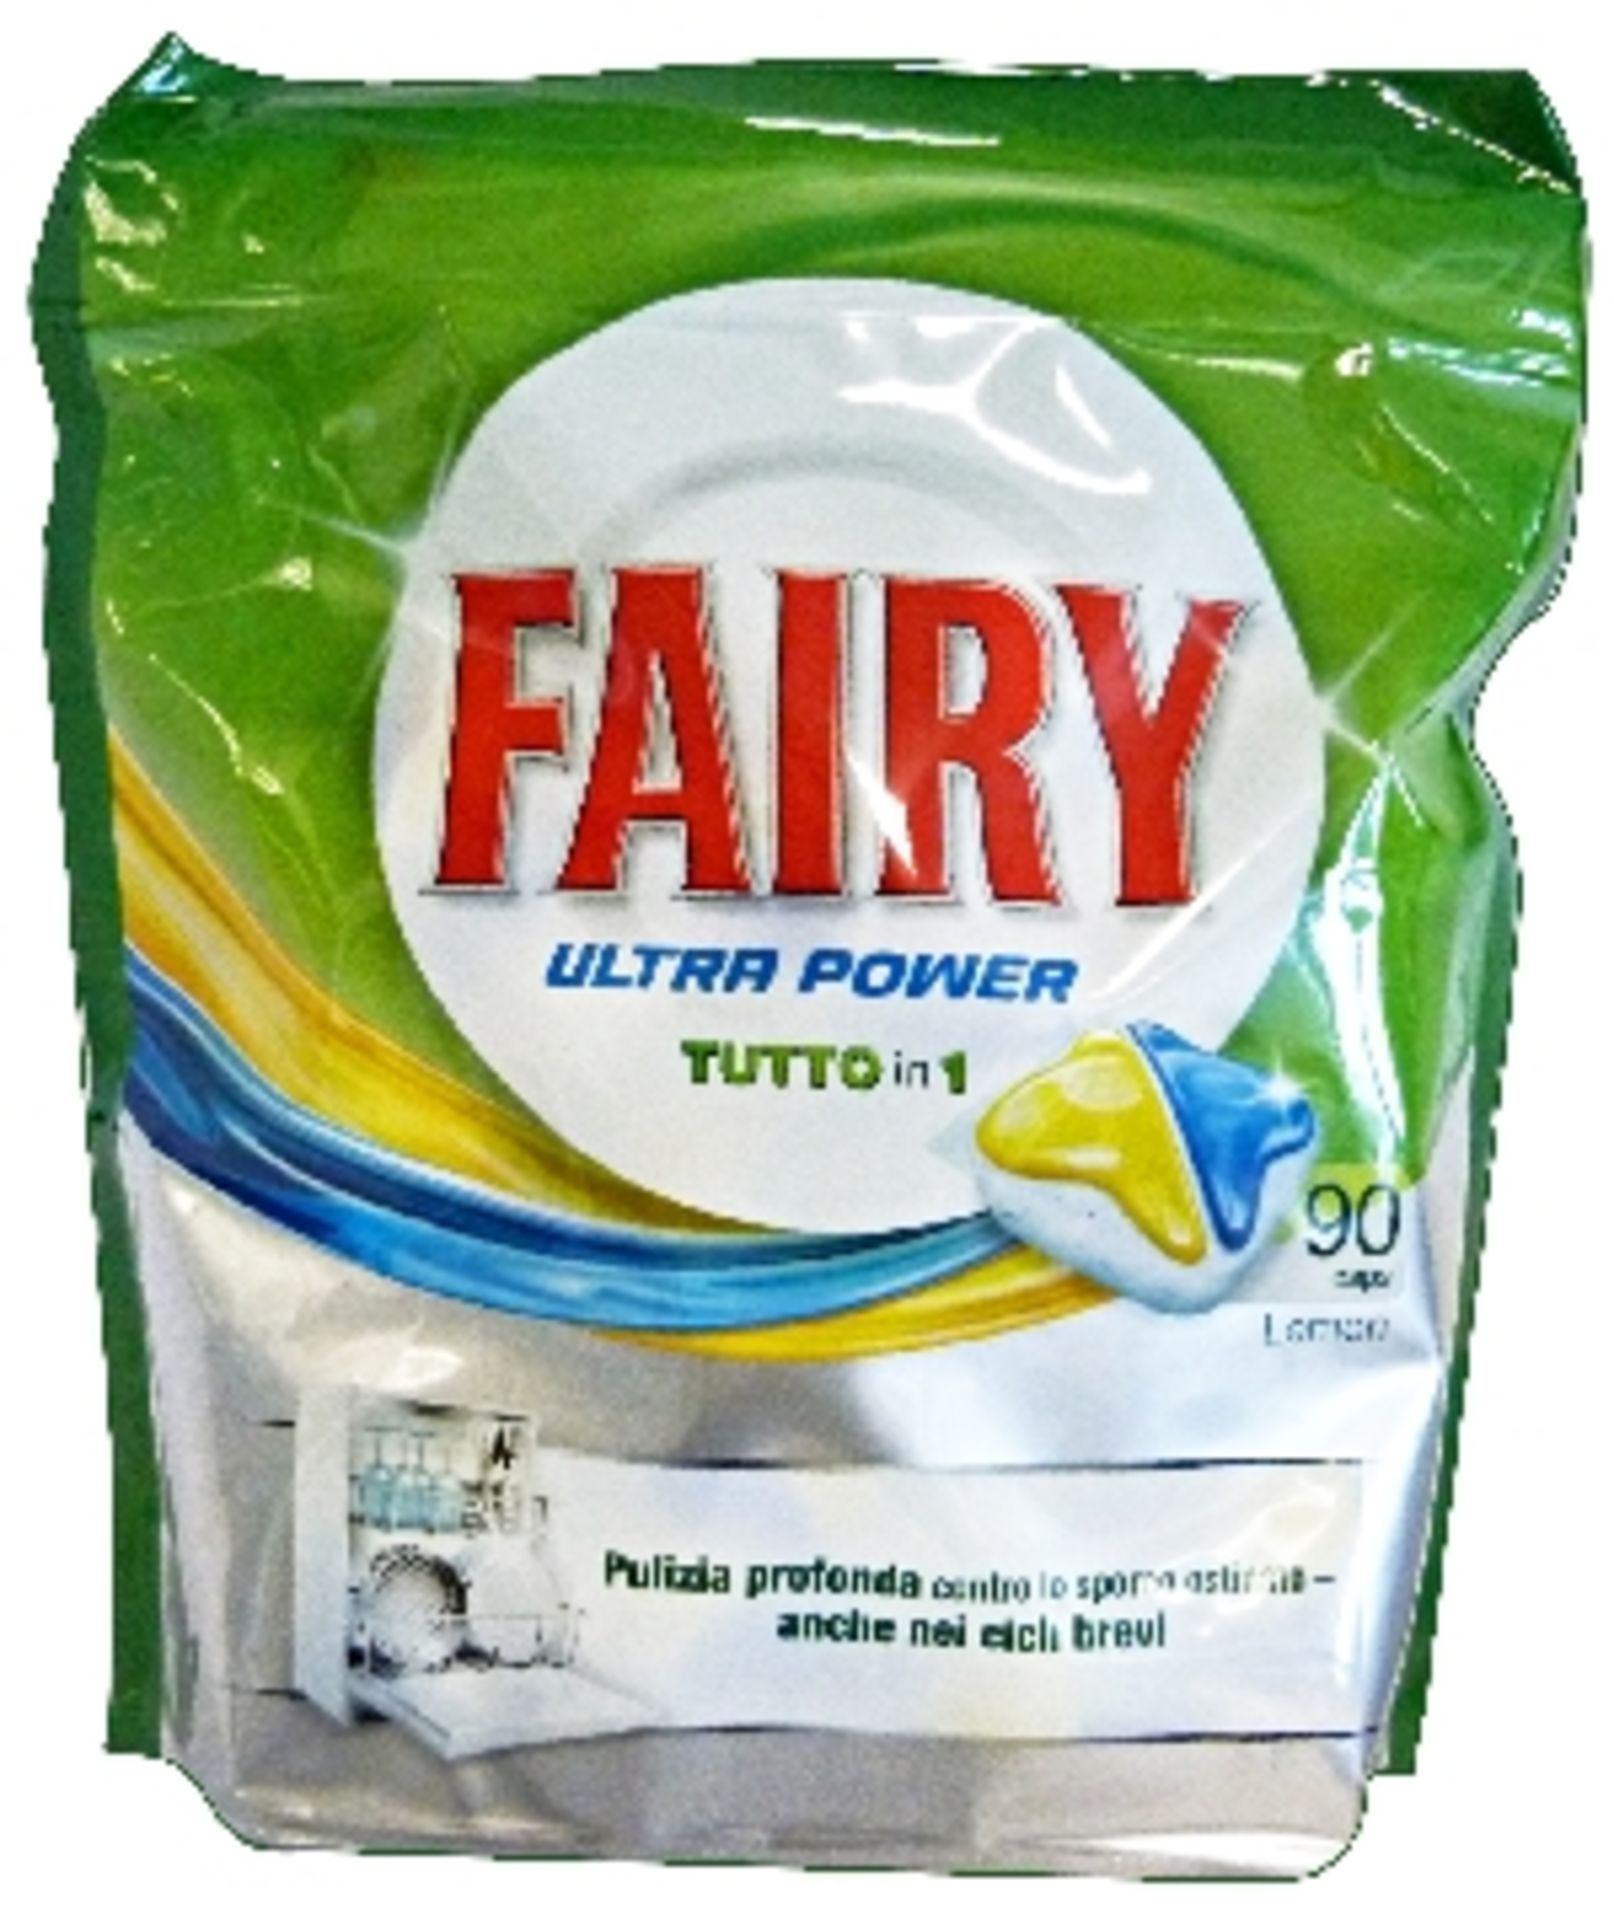 V Brand New Fairy Ultra Power All-In-One Lemon Dishwasher Tablets 90 Pack ISP£14.99 X 3 Bid price to